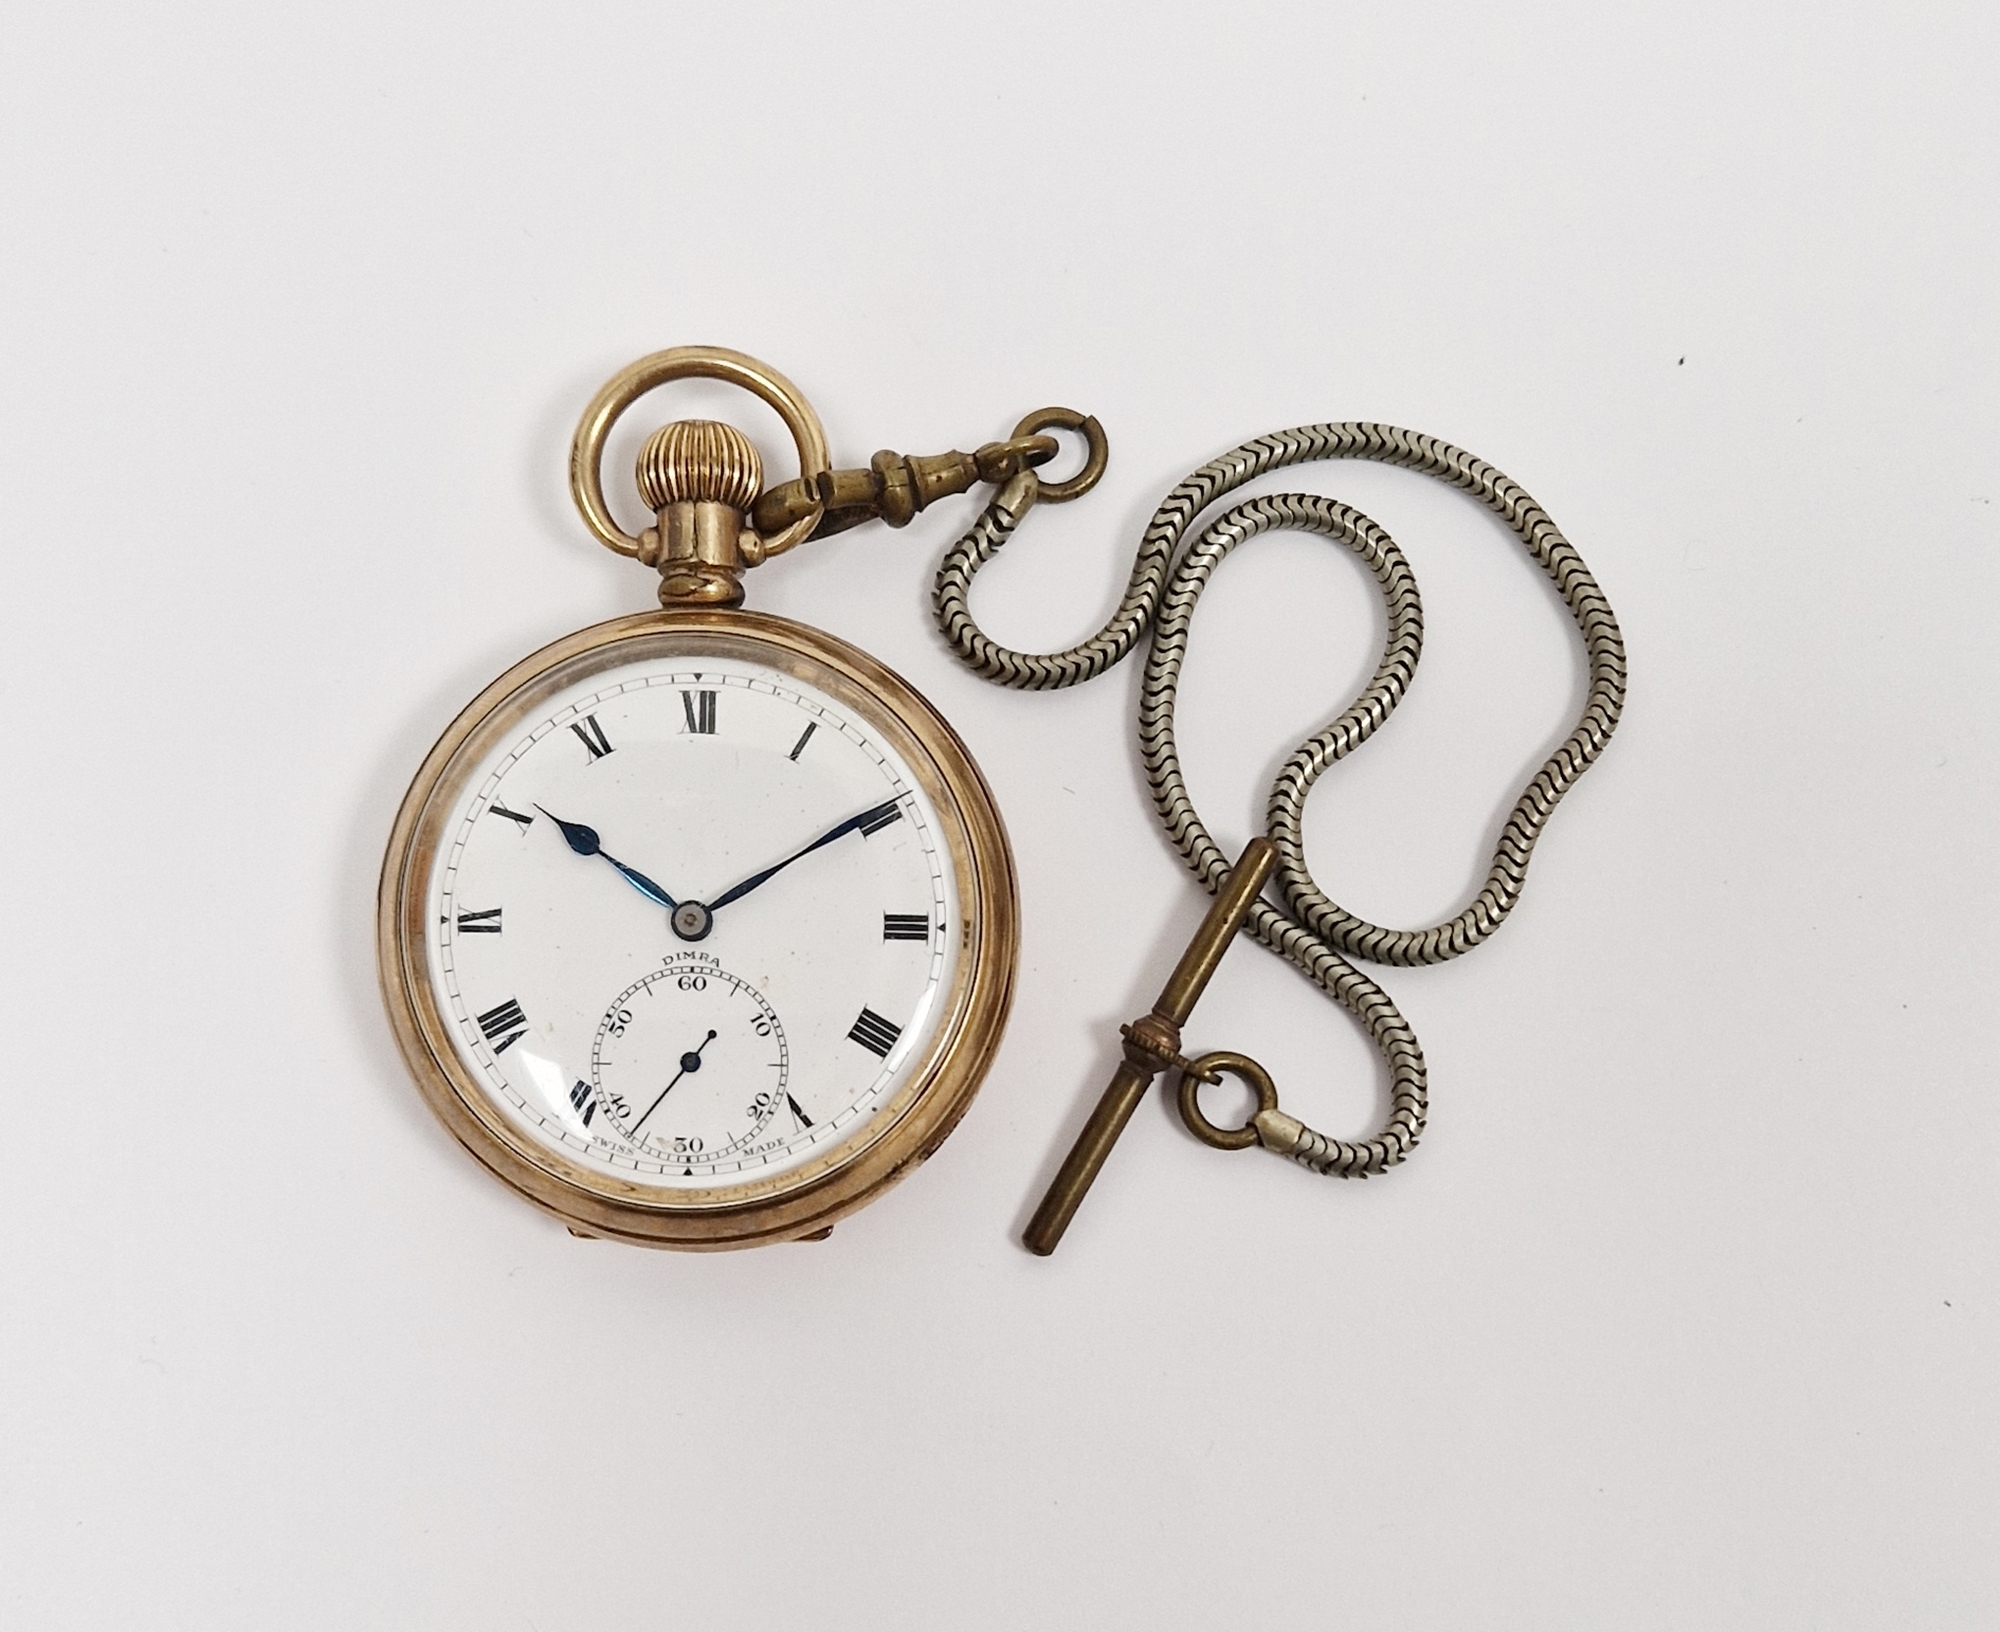 Early 20th century open-faced pocket watch by Dimra, the enamelled dial with Roman numerals denoting